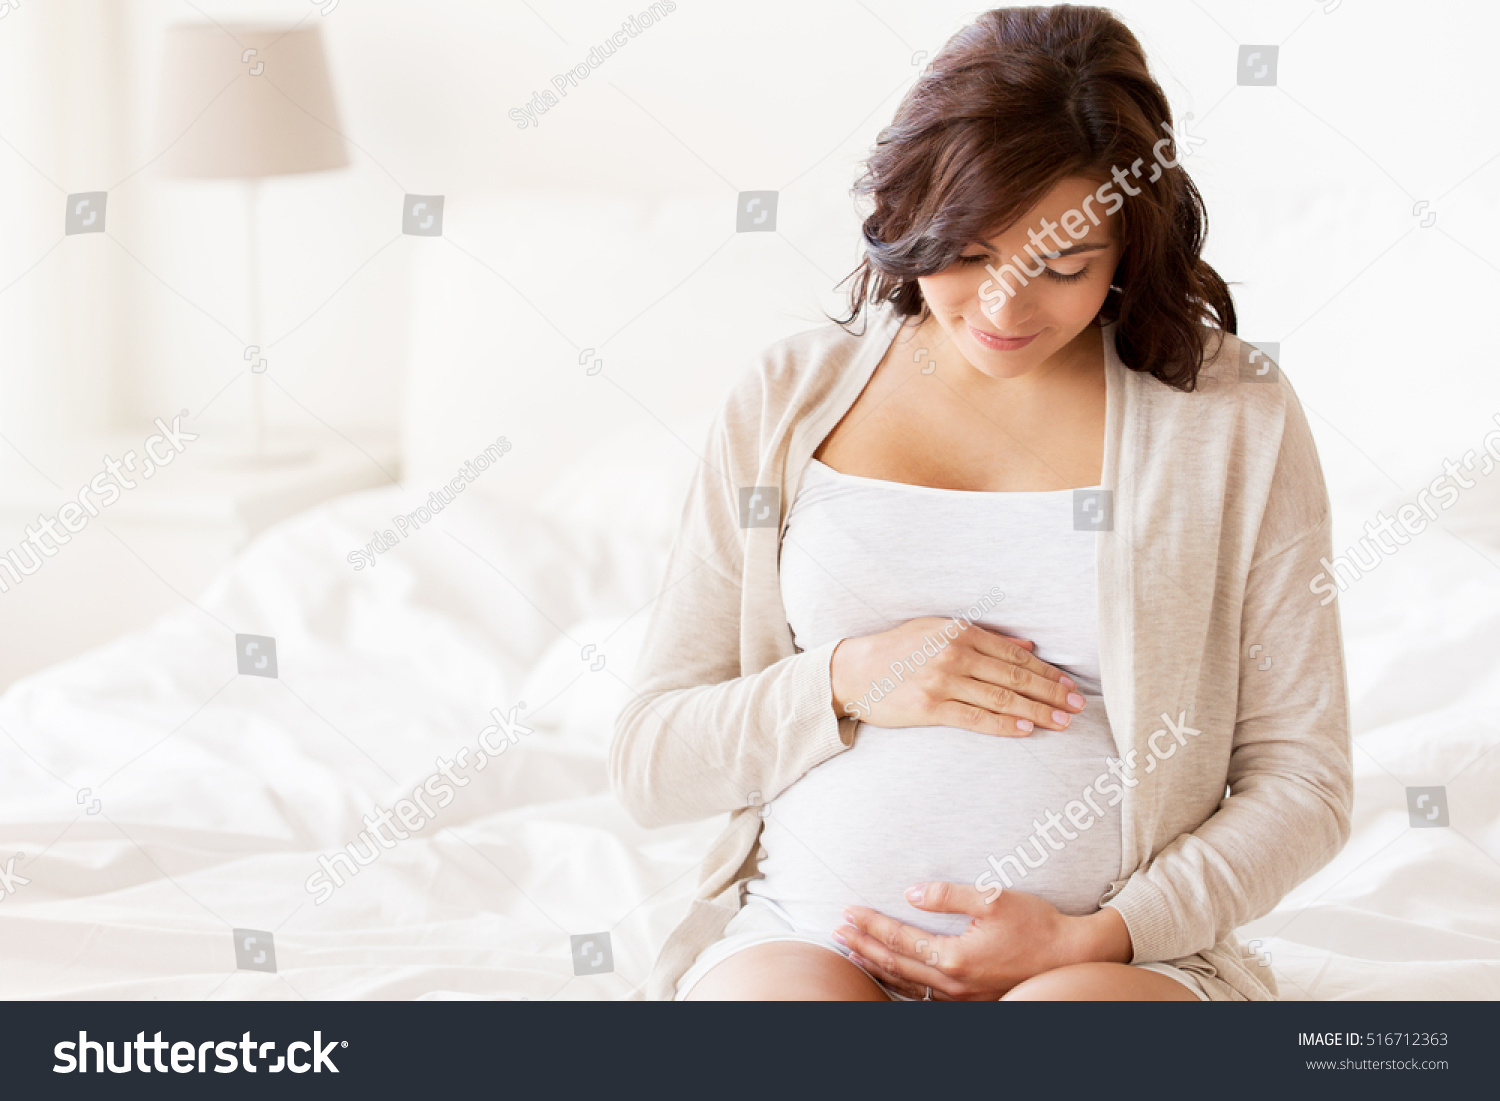 pregnancy, rest, people and expectation concept - happy pregnant woman sitting on bed and touching her belly at home #516712363